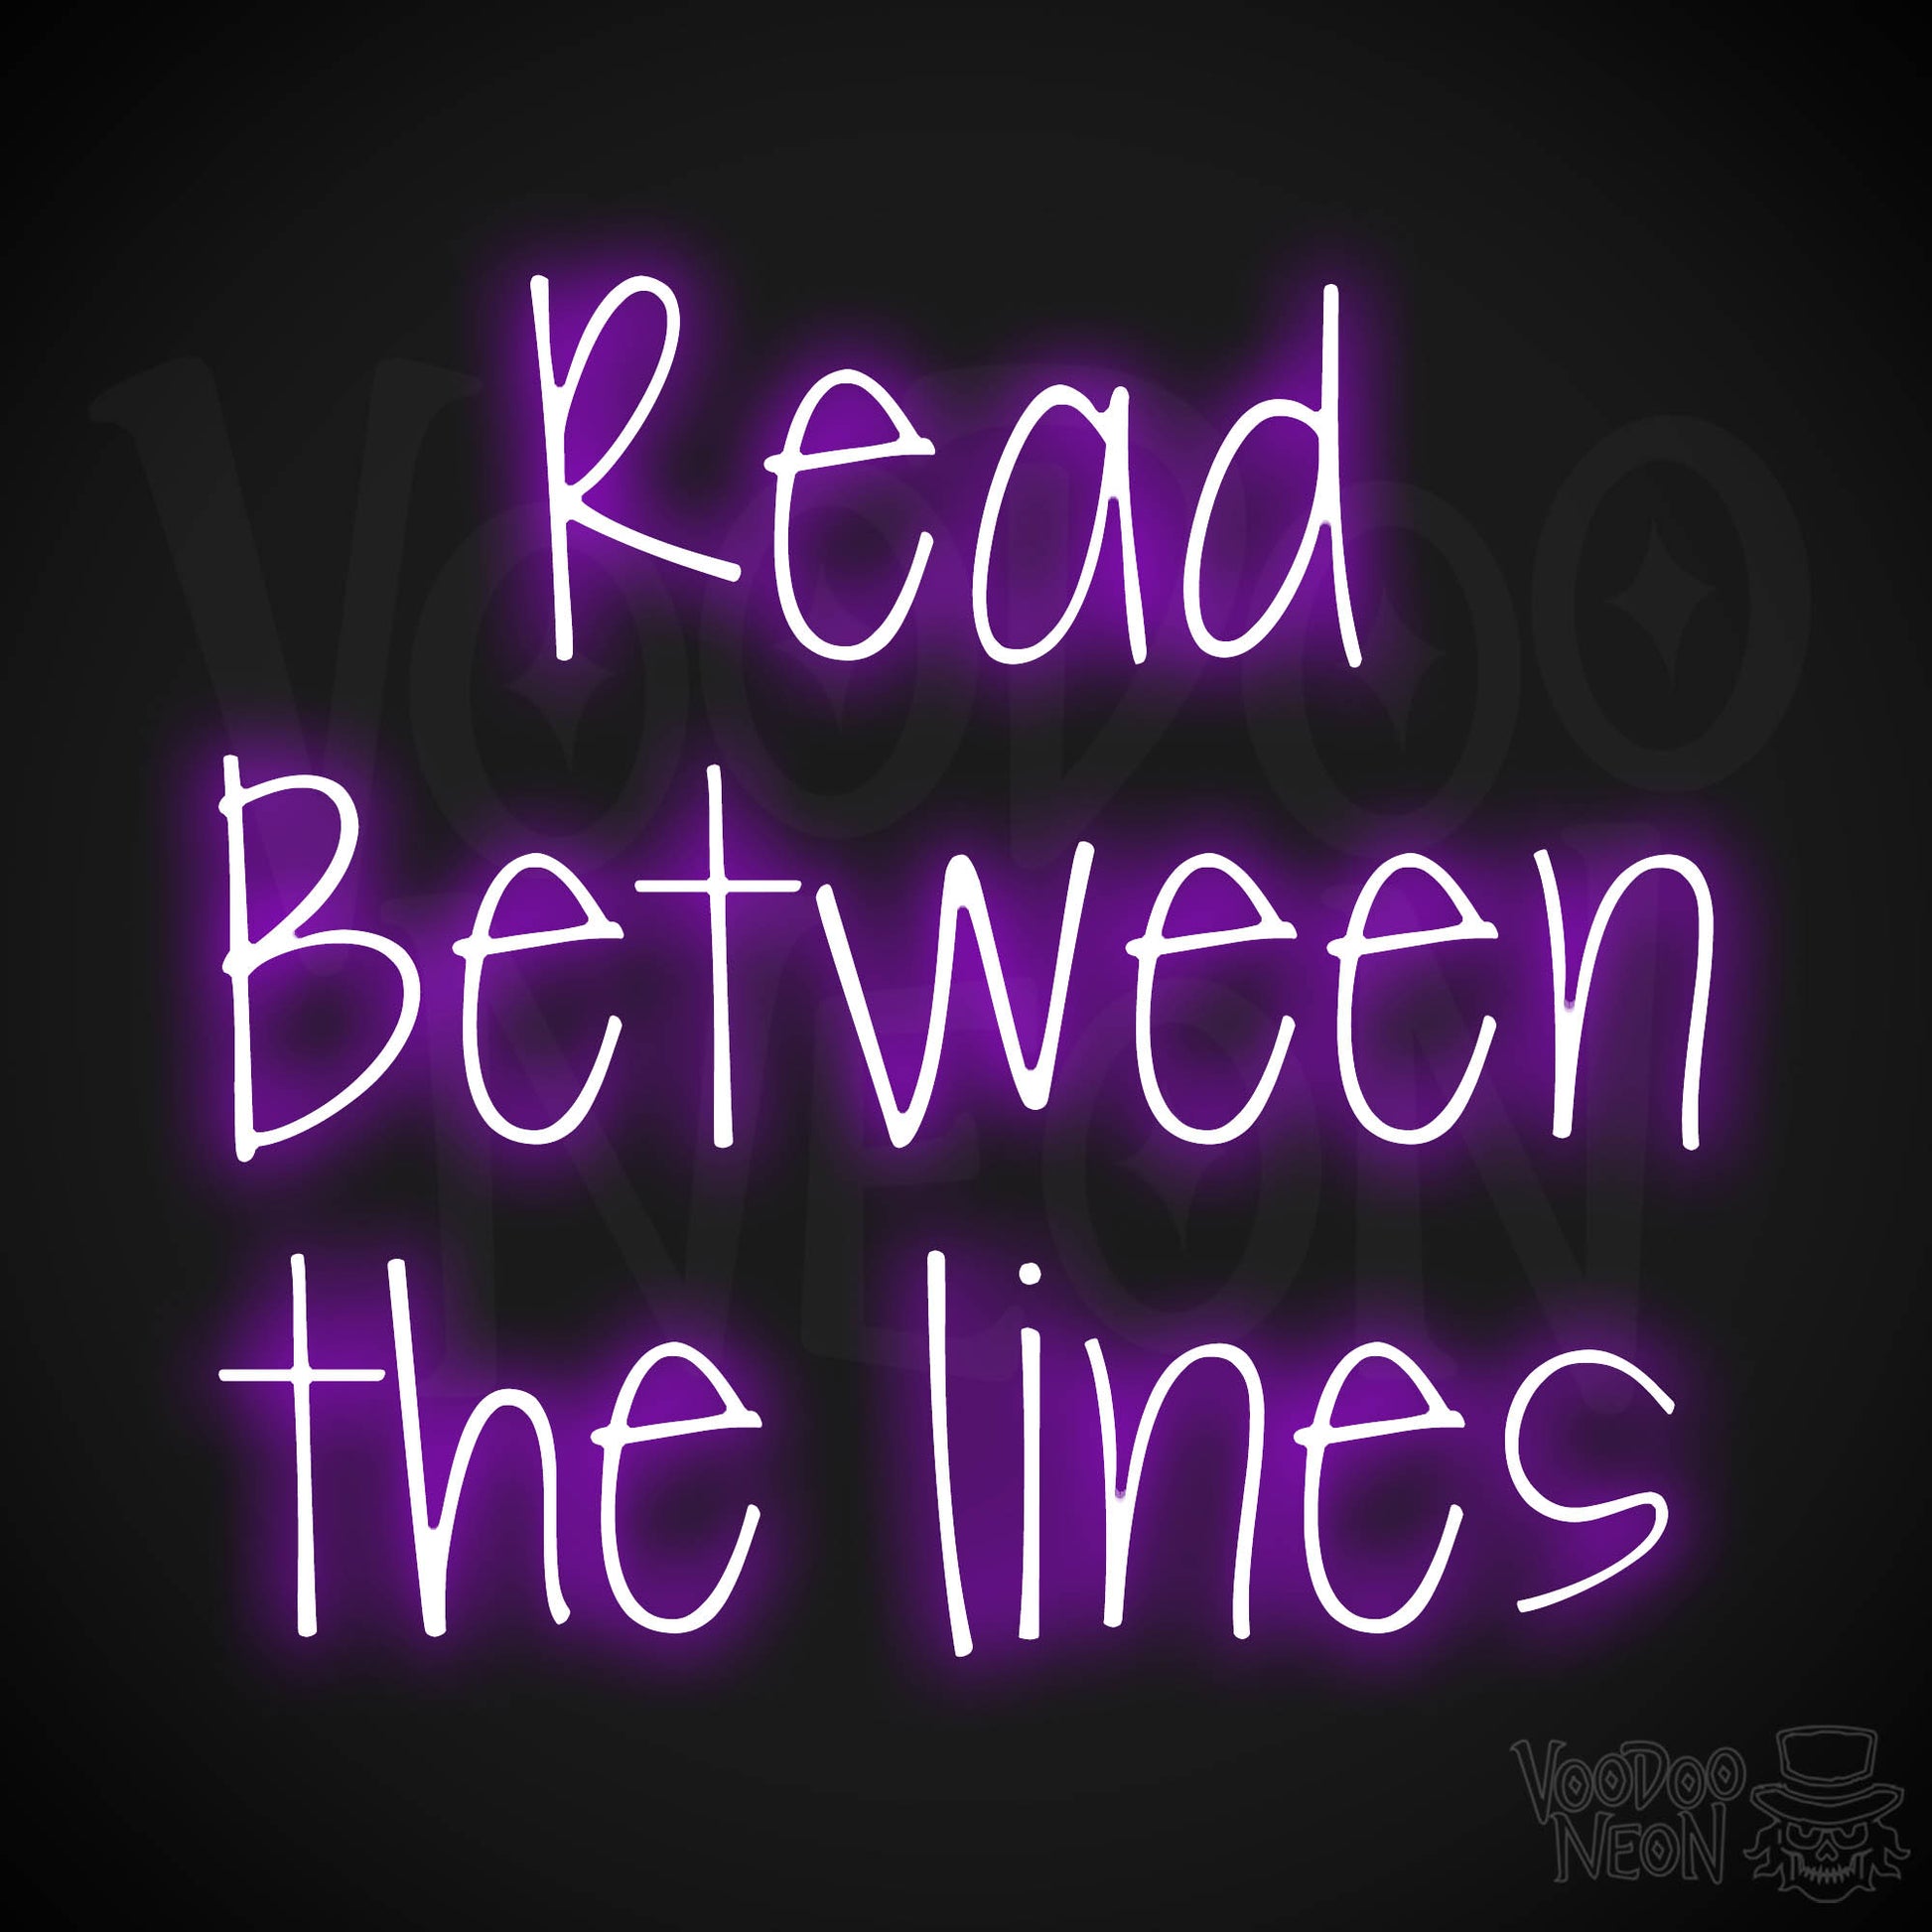 Read Between The Lines LED Neon - Purple